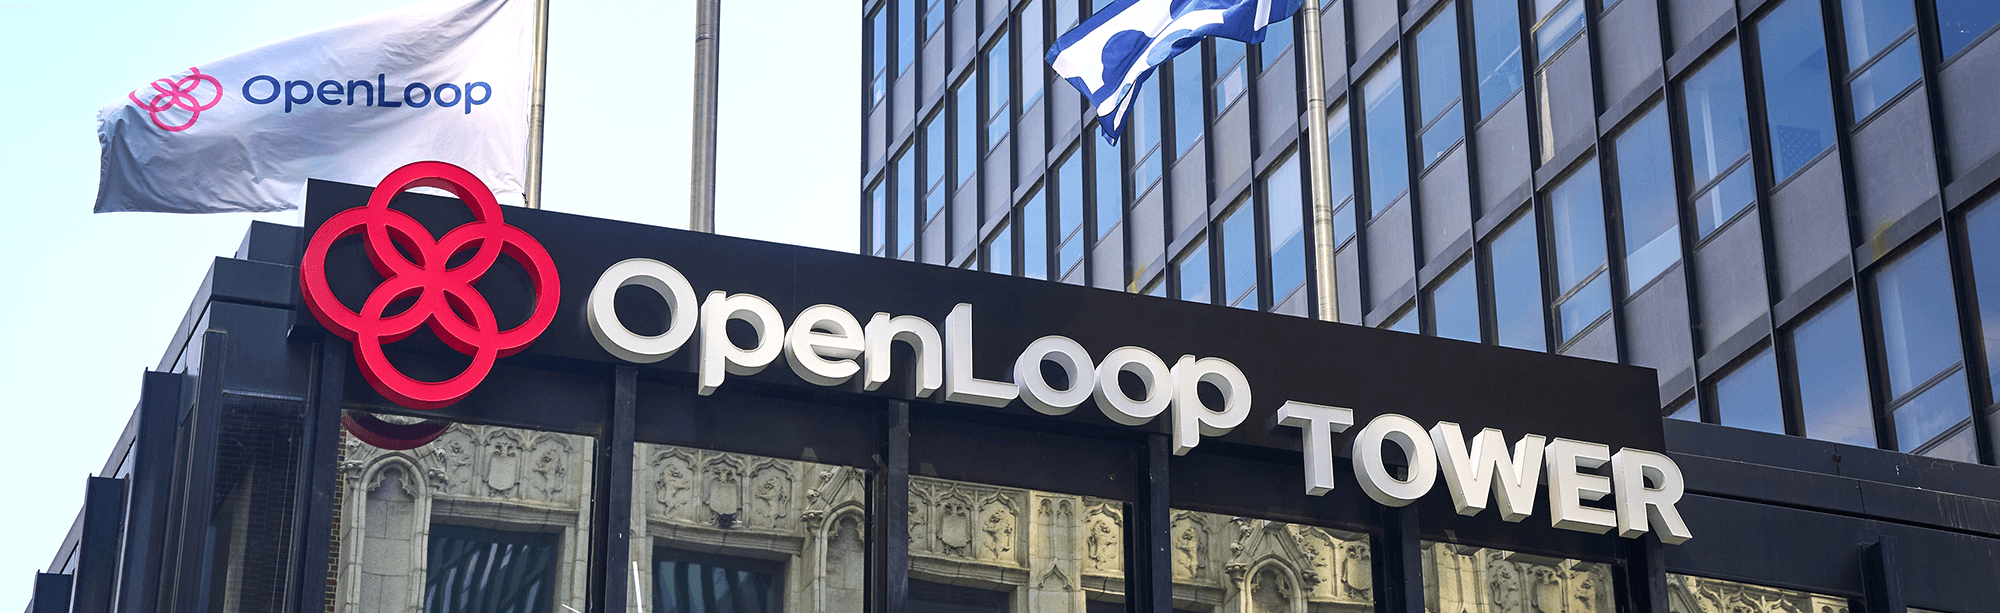 An image of the OpenLoop Tower building sign at OpenLoop's headquarters in downtown Des Moines, Iowa